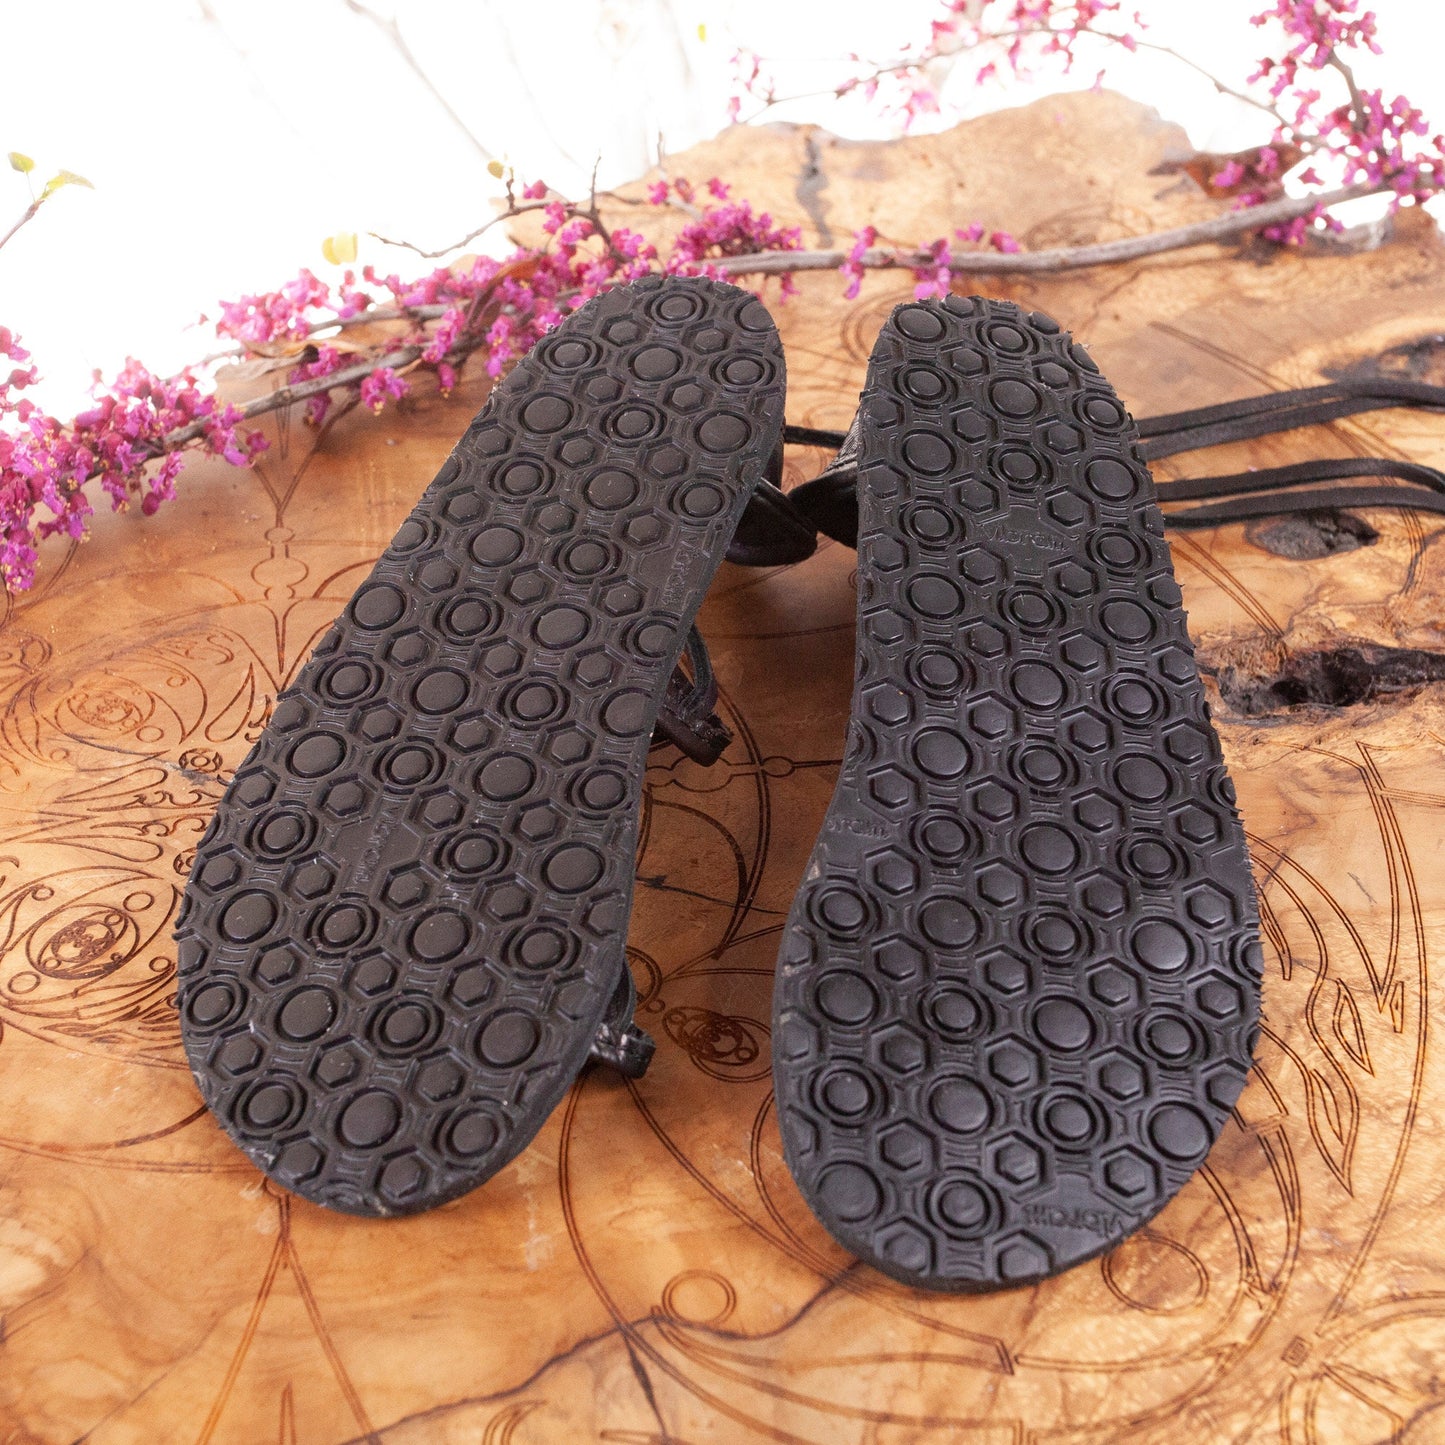 Made To Order, Oasis, Vibram Soles, Grecian Sandals, Leather Sandals, Sandals, Greek Sandals, Goddess Sandals,Barefoot Sandals,Oasis Sandals